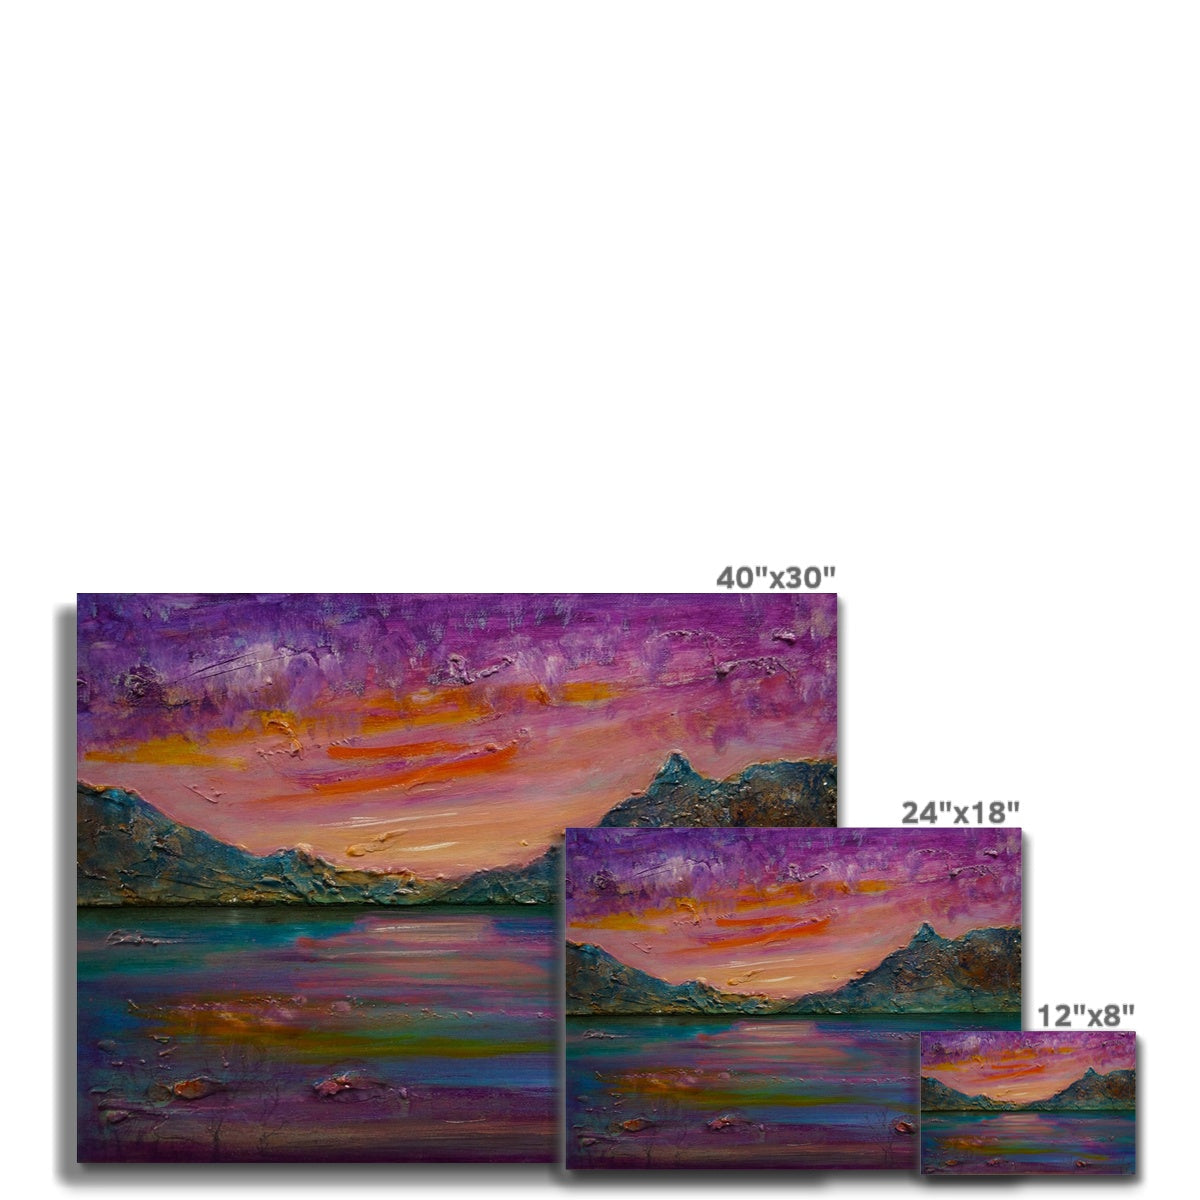 Loch Leven Sunset Painting | Canvas From Scotland-Contemporary Stretched Canvas Prints-Scottish Lochs & Mountains Art Gallery-Paintings, Prints, Homeware, Art Gifts From Scotland By Scottish Artist Kevin Hunter